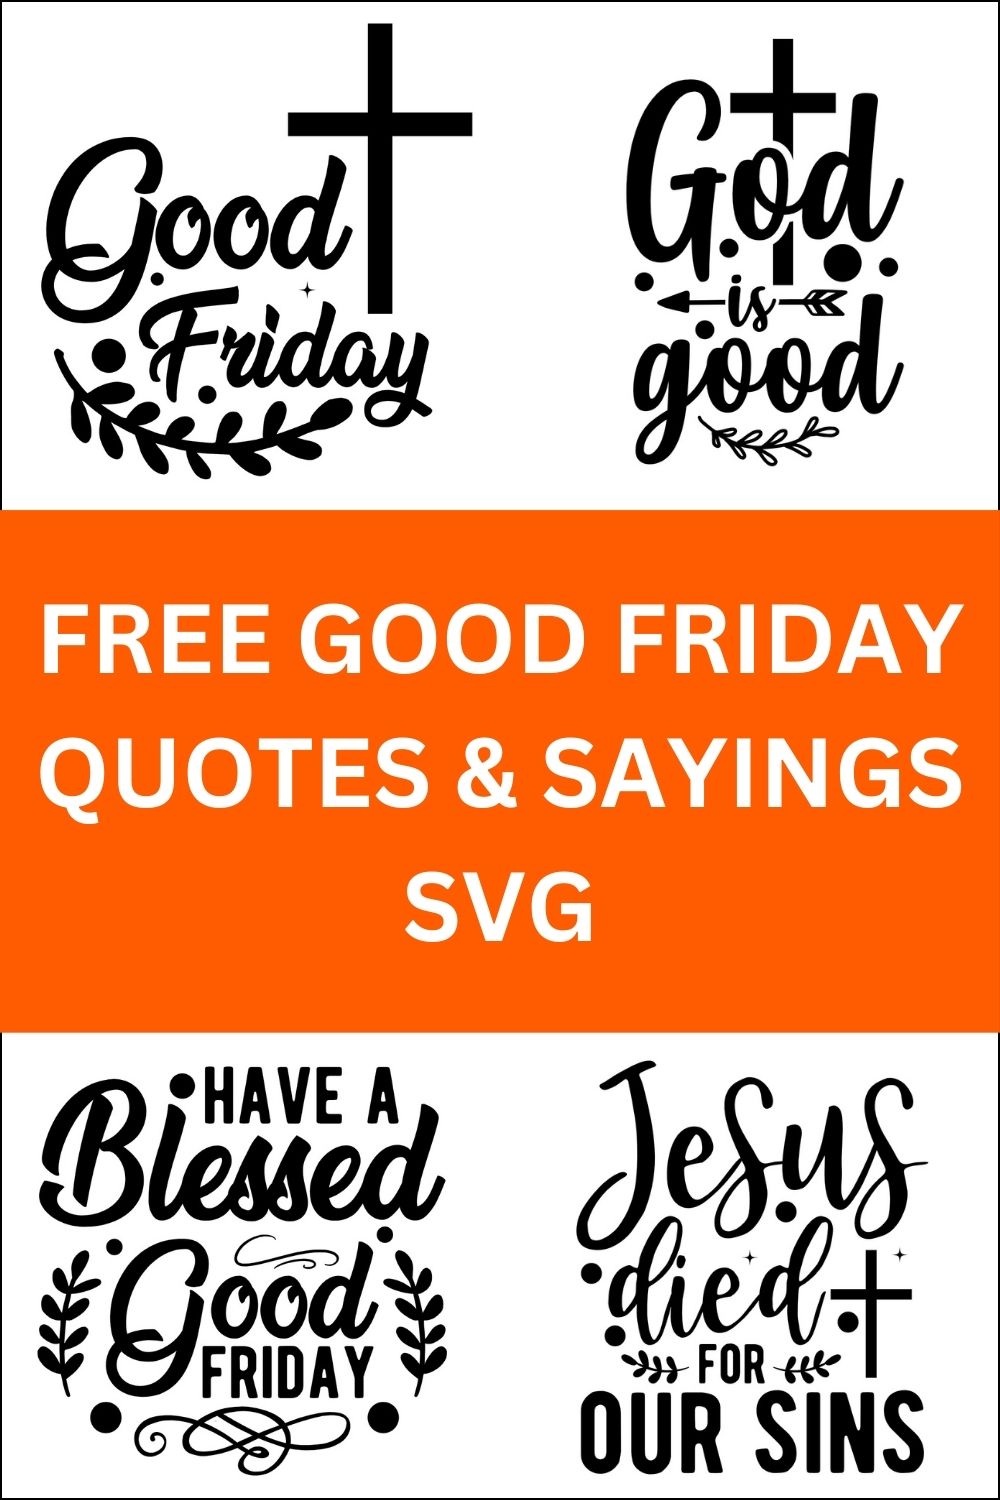 Good Friday sayings quotes cricut download svg clipart designs free